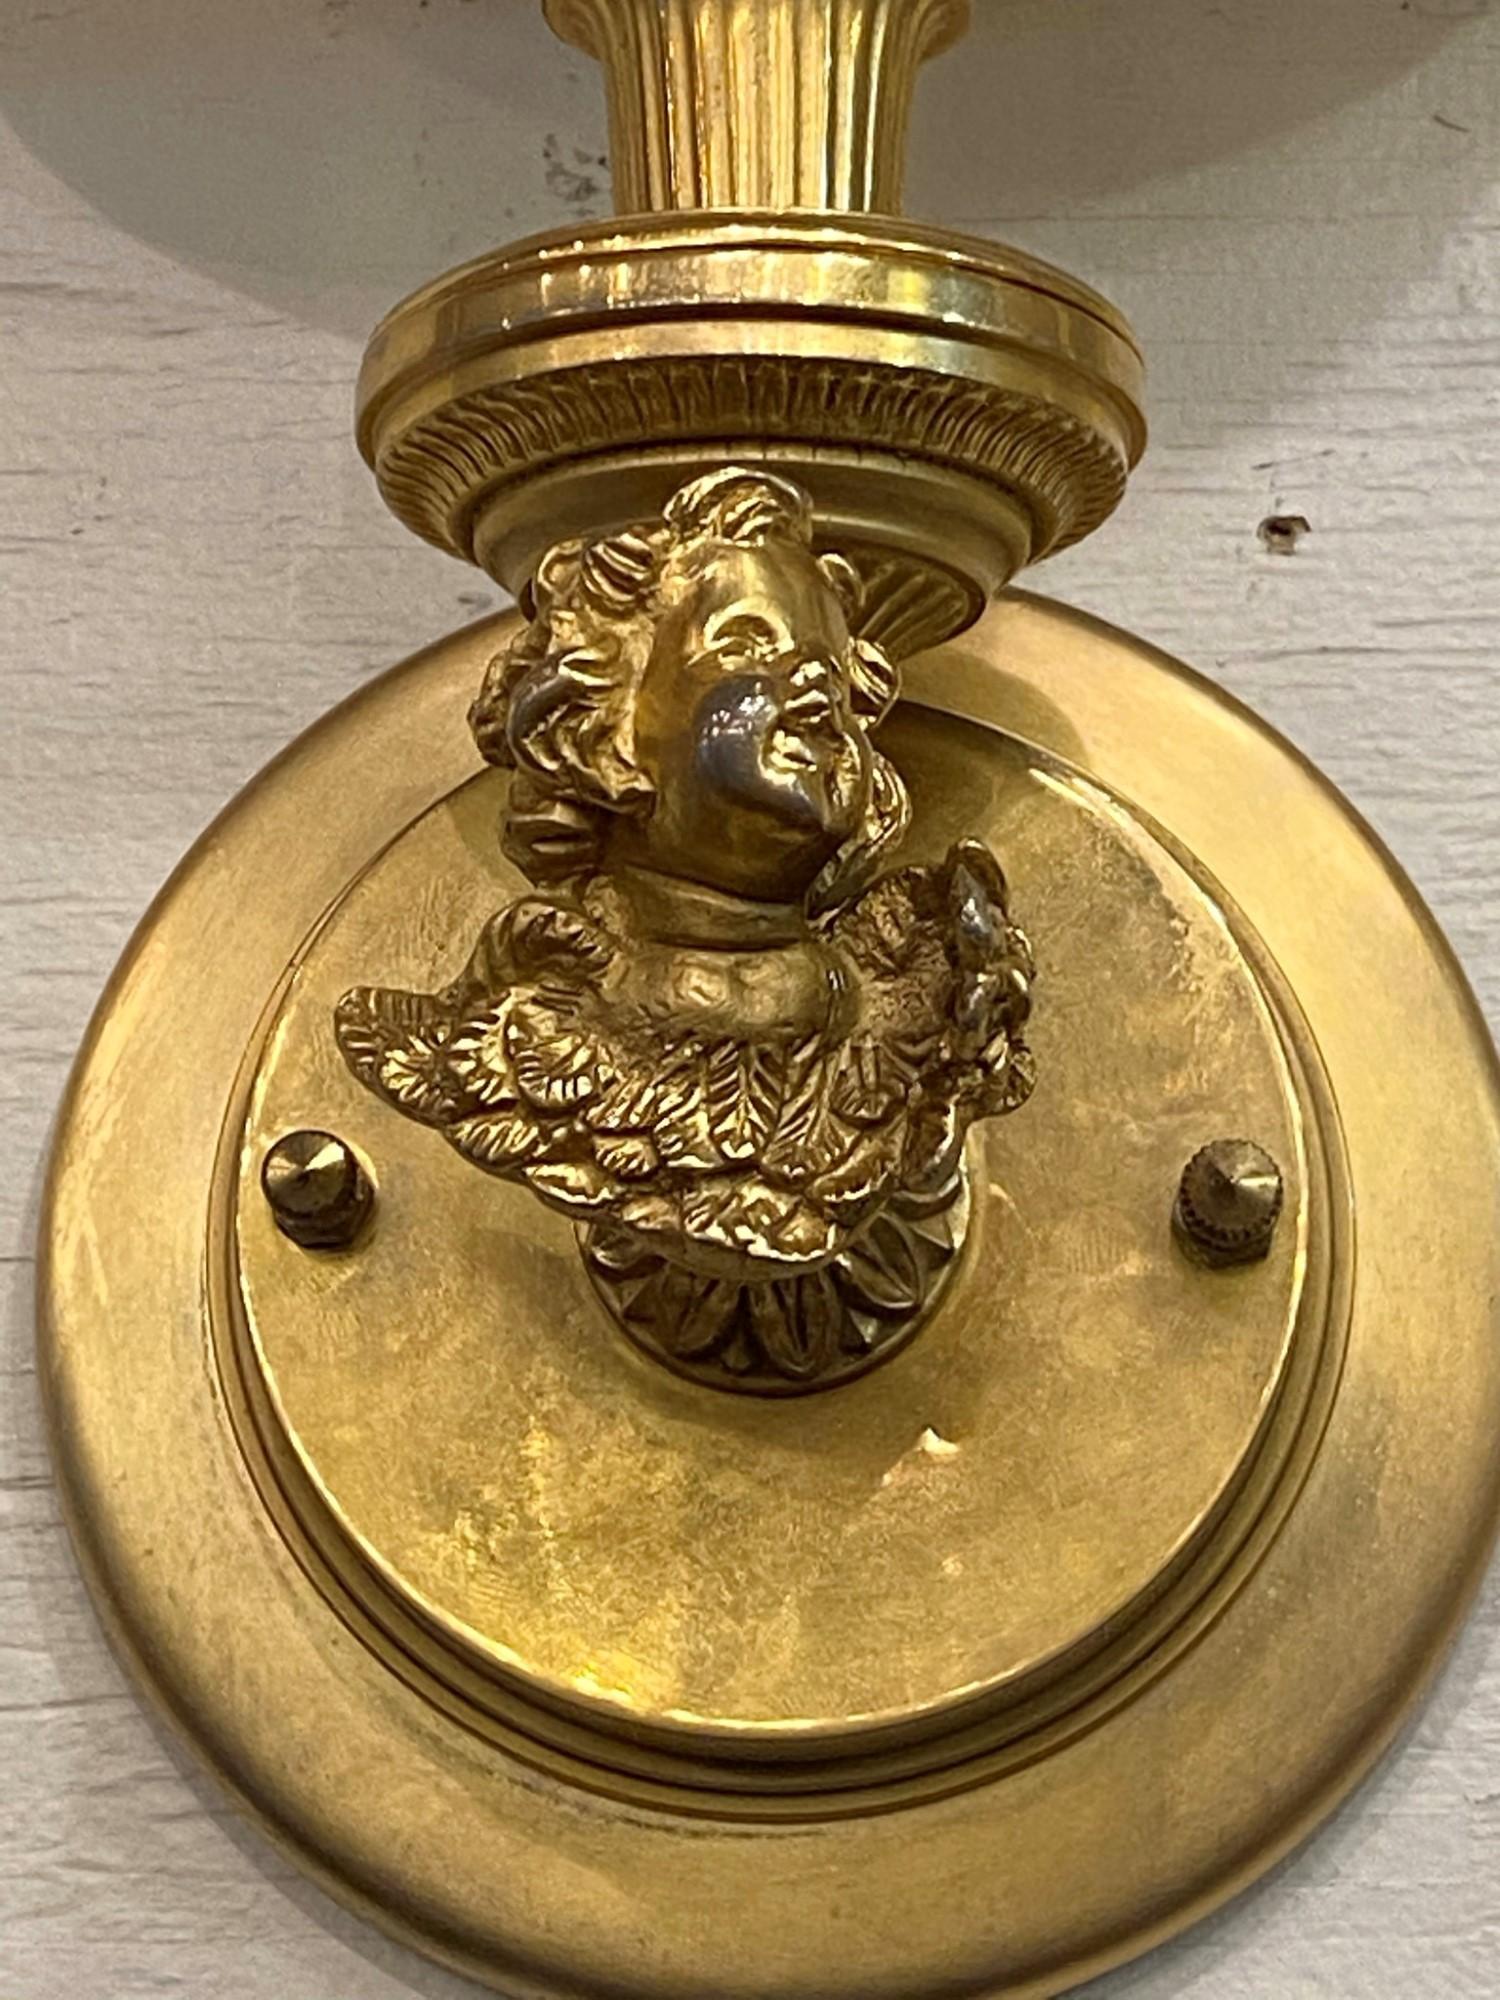 This pair of wall sconces are gold gilded over brass, and are designed with a cherub supporting a single arm. The original white shade is included. They can be seen at our 2420 Broadway location on the upper west side in Manhattan.